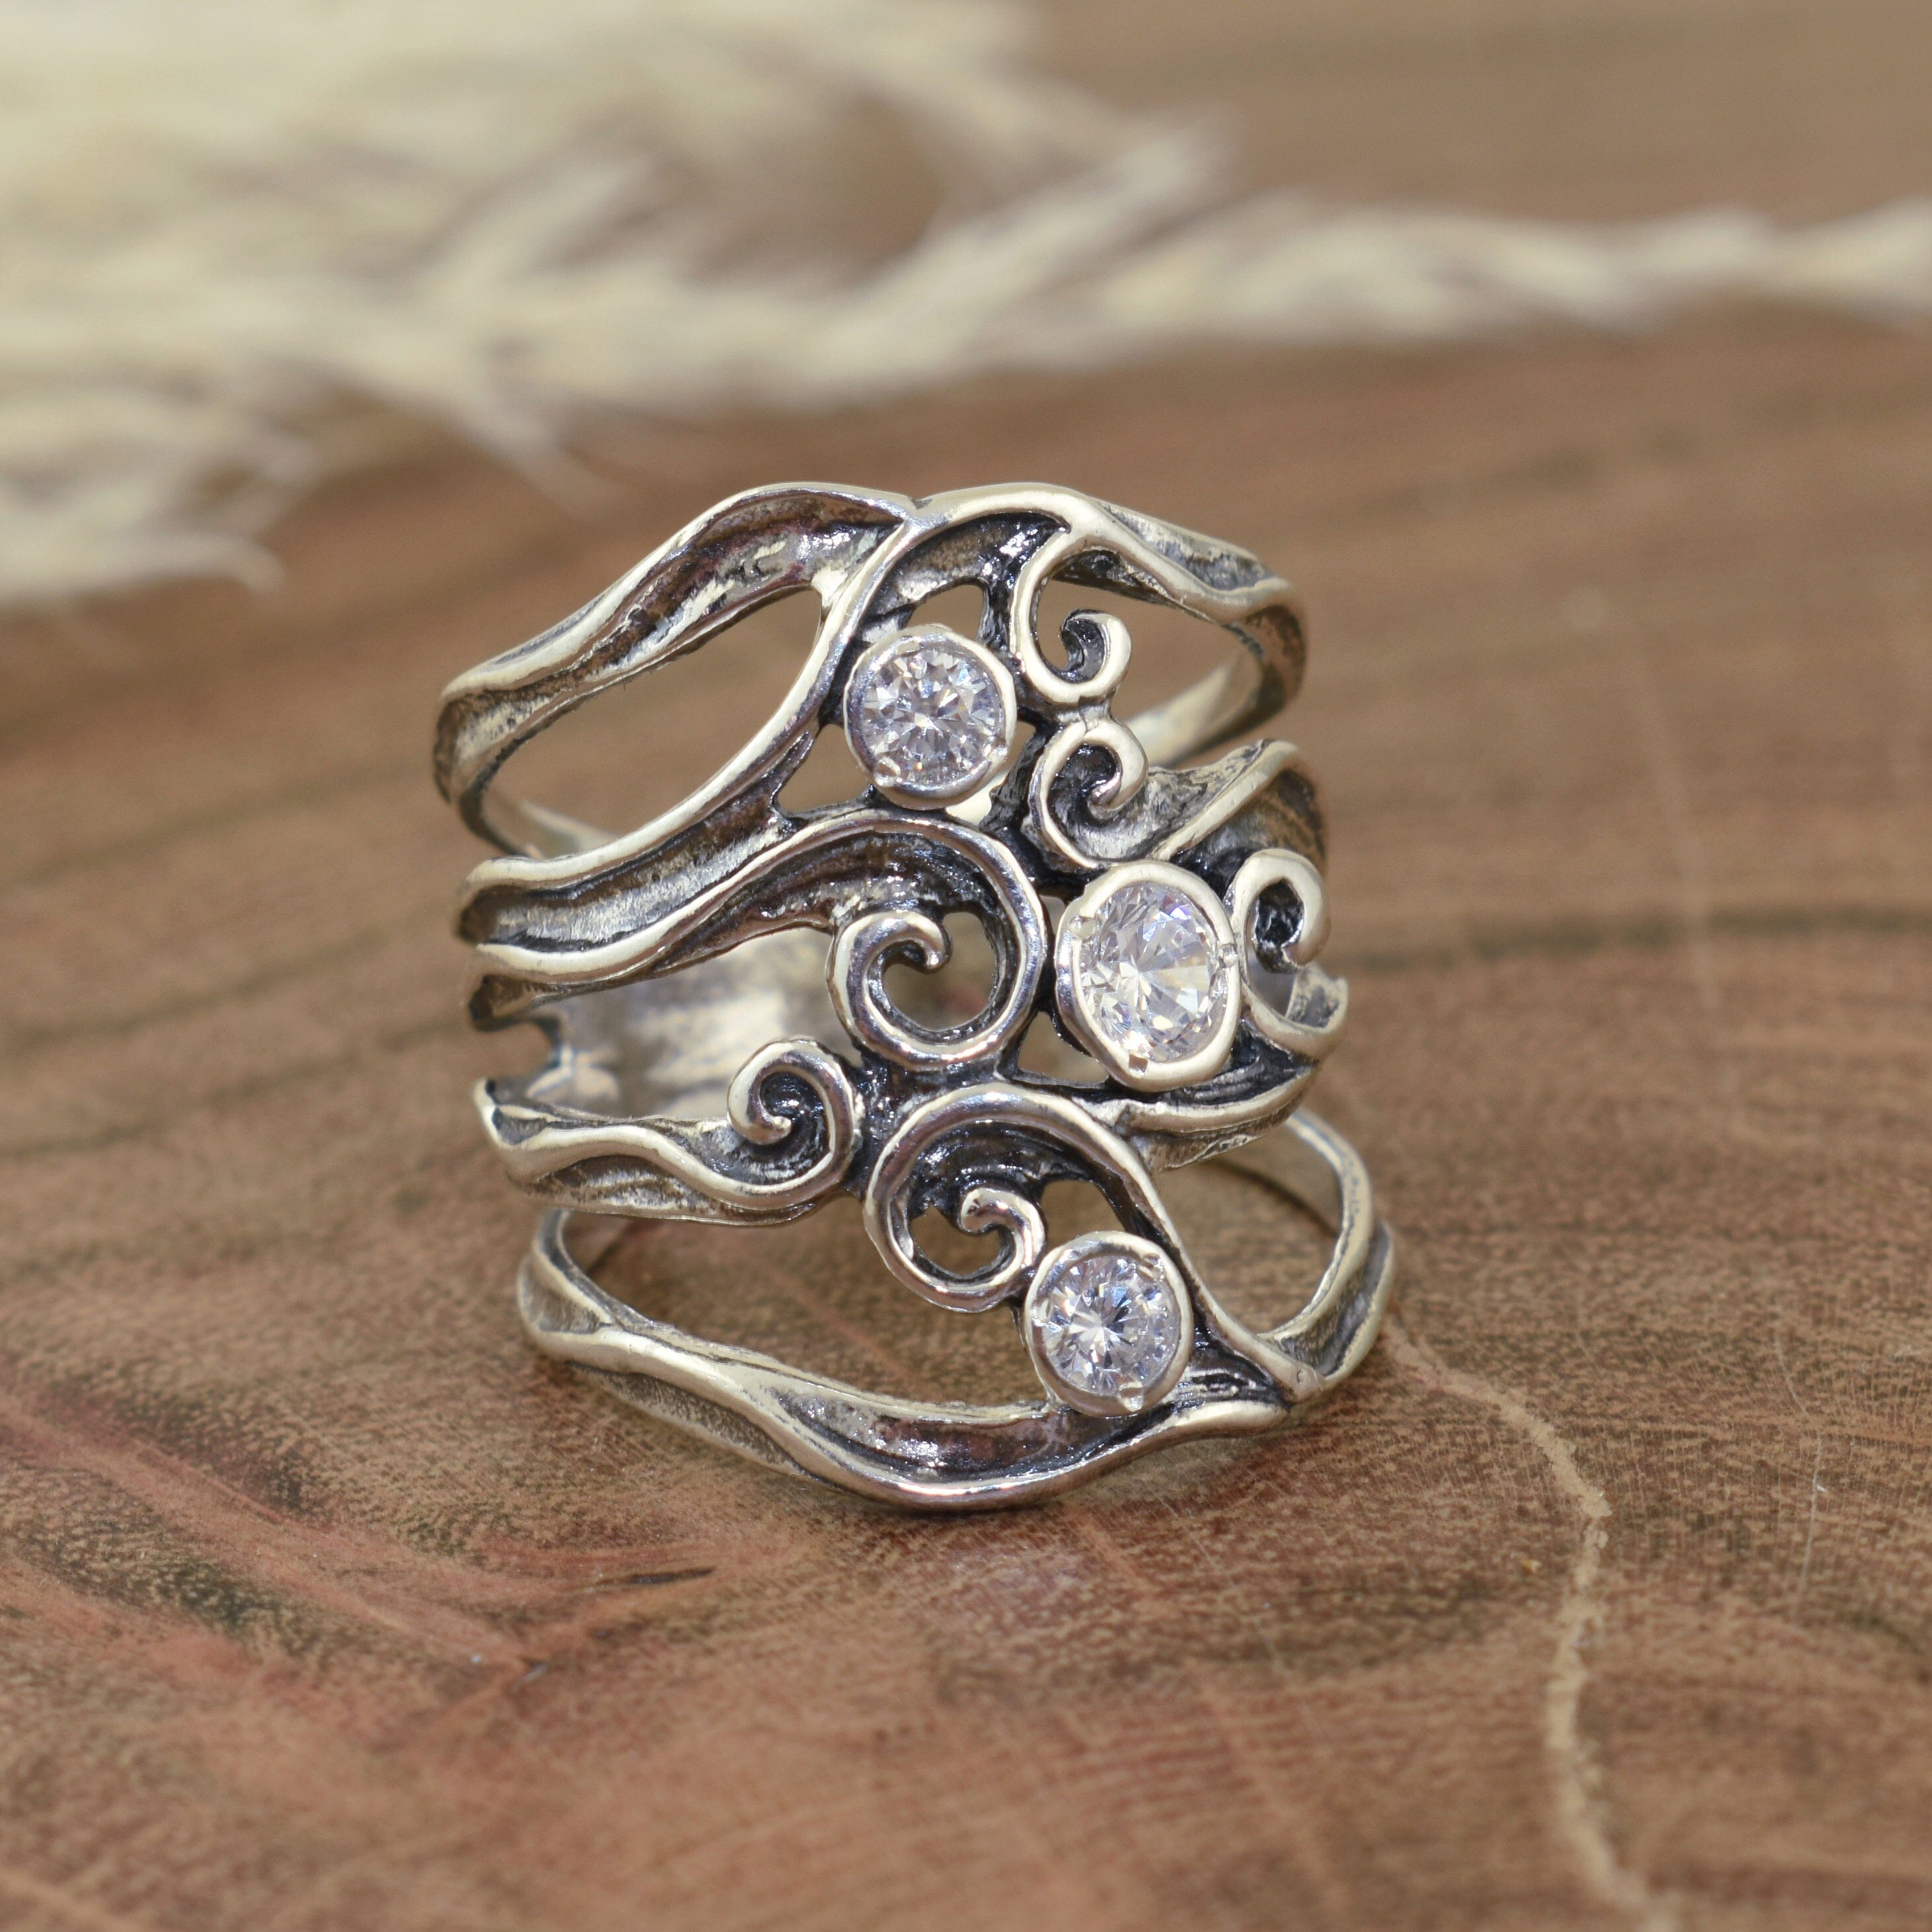 chunky .925 sterling silver ring featuring three round CZs